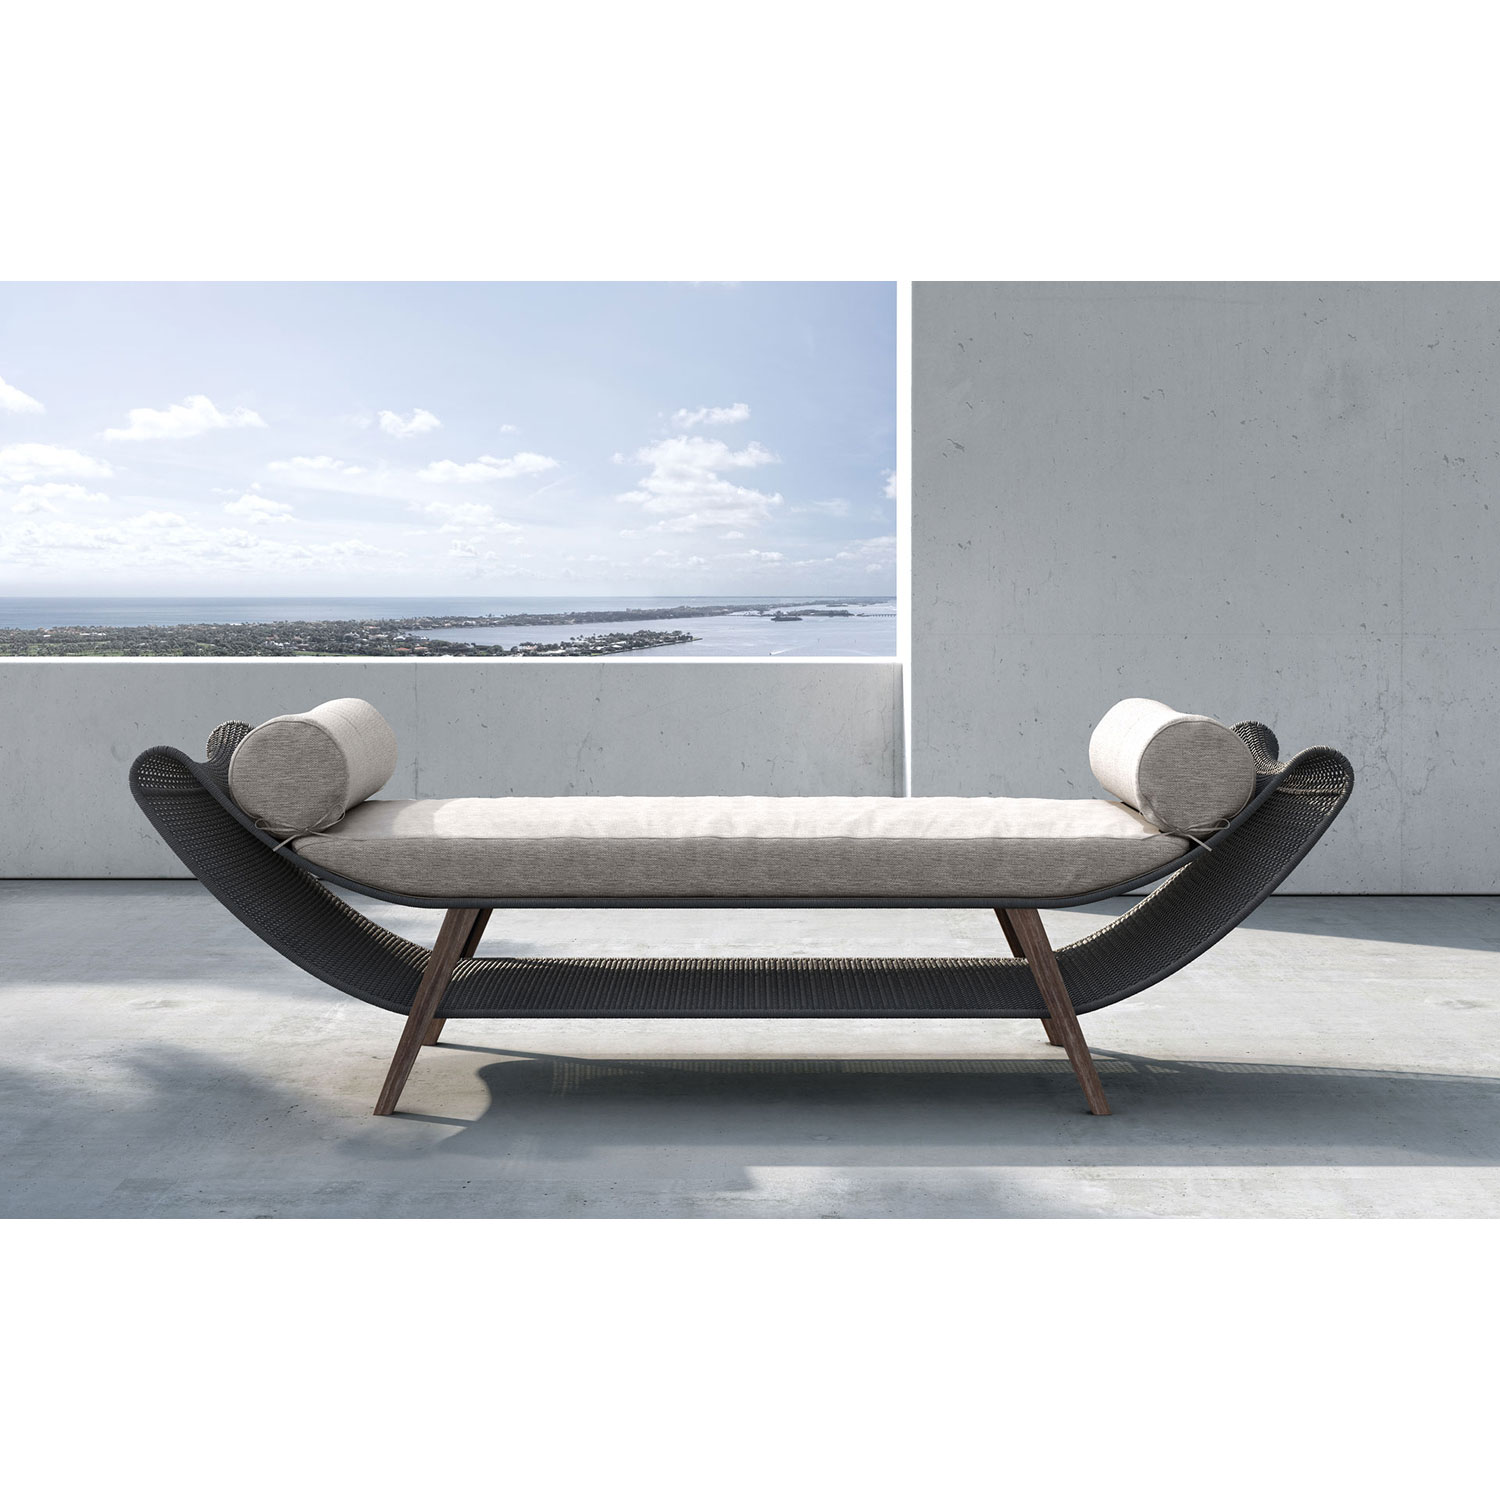 Outdoor Benches Category